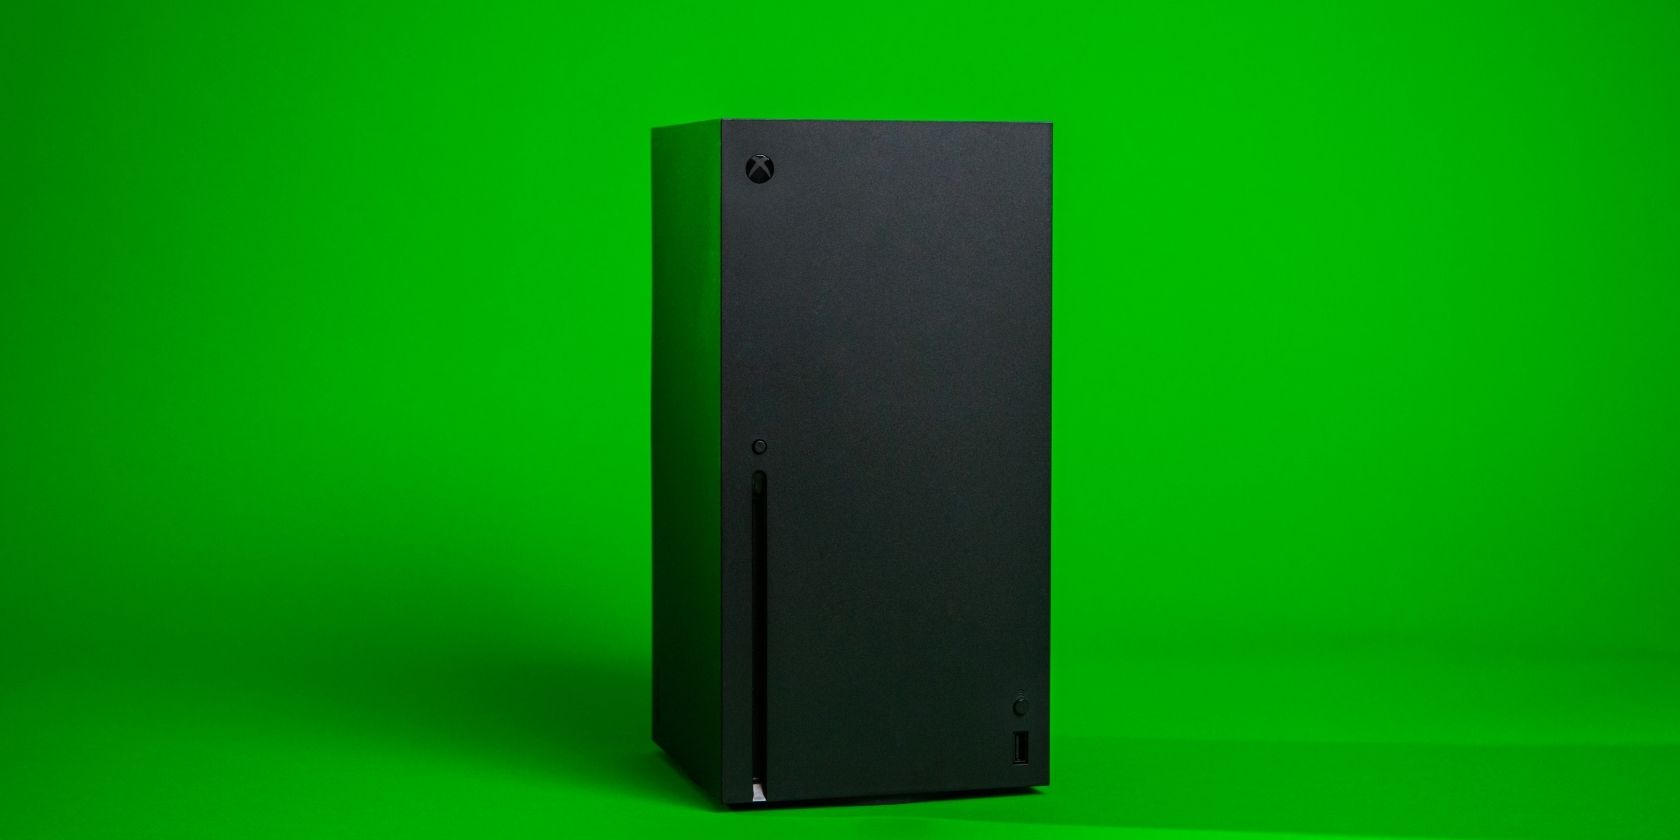 How to Customize Your Xbox Series X|S Power Options to Save Energy